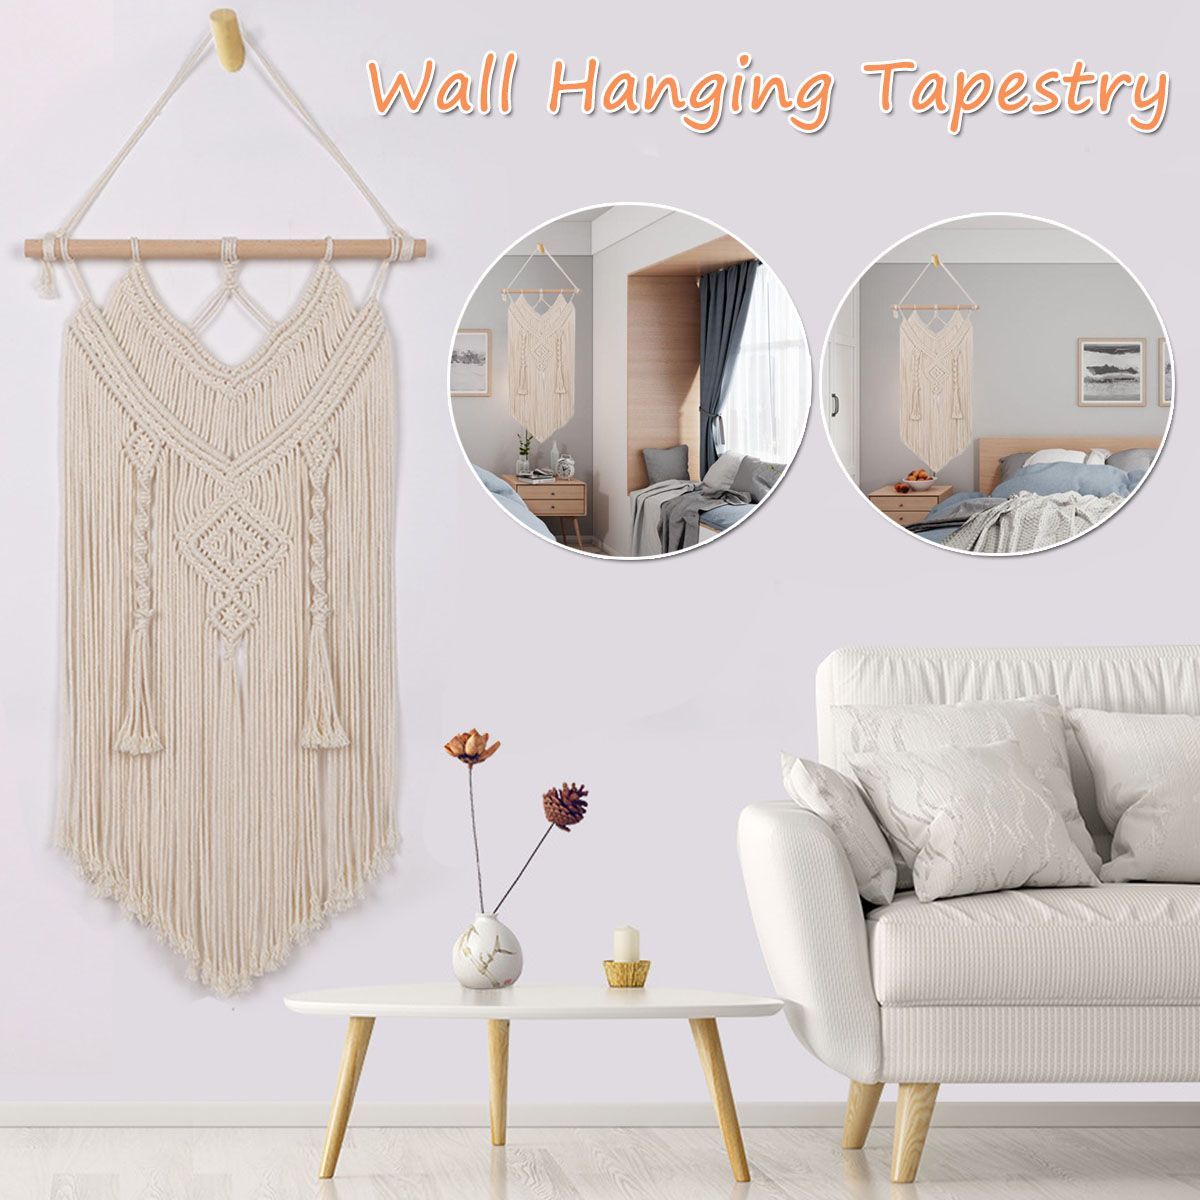 Knotted-Macrame-Knitting-Wall-Handmade-Bohemian-Hanging-Tapestry-Home-Decor-1637670